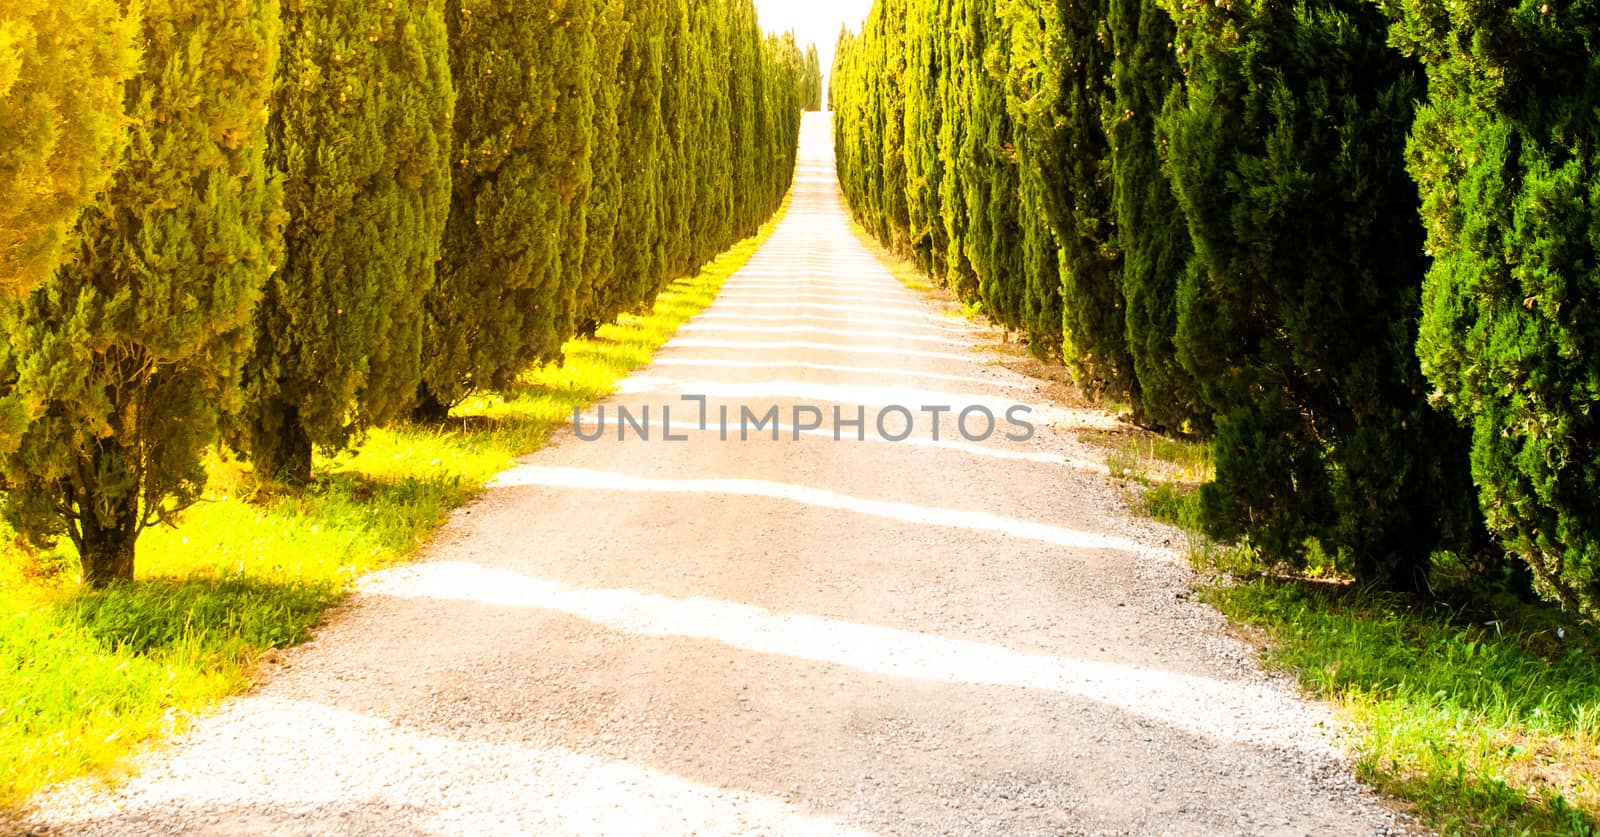 Cypress alley with rural country road, Tuscany, Italy. by pyty